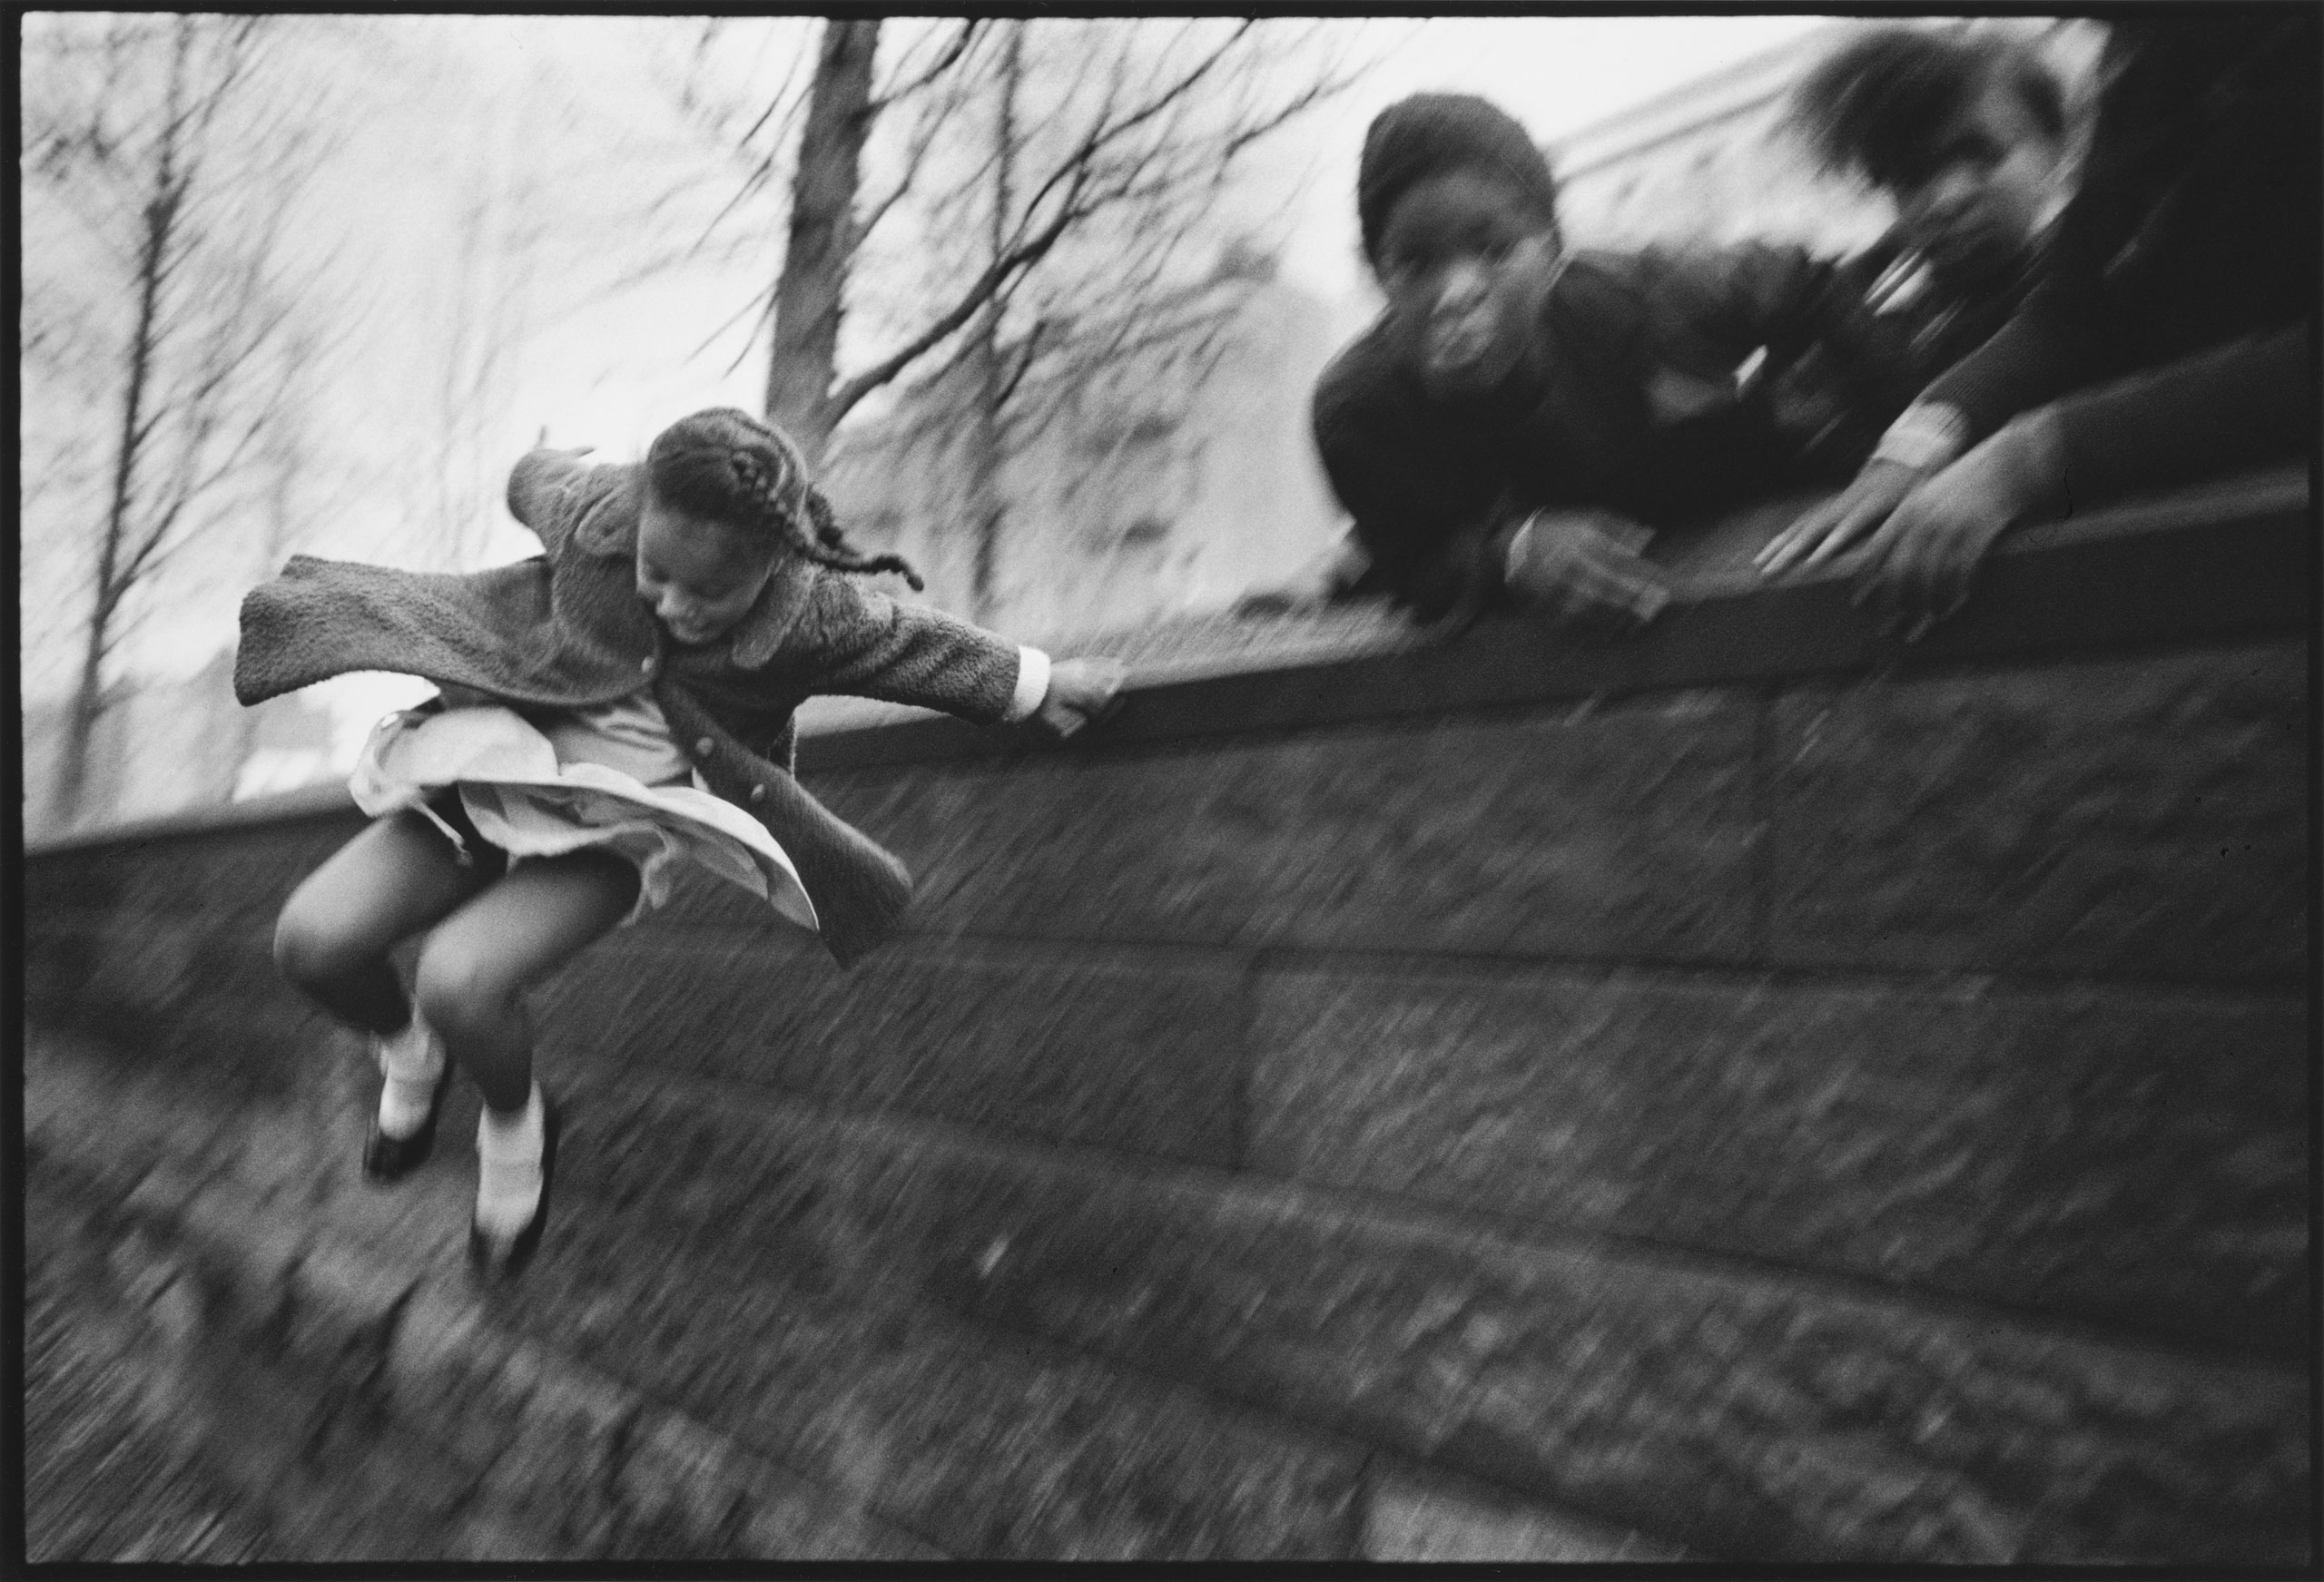 Girl jumping over a wall in Central Park. New York, 1967. (Mary Ellen Mark)